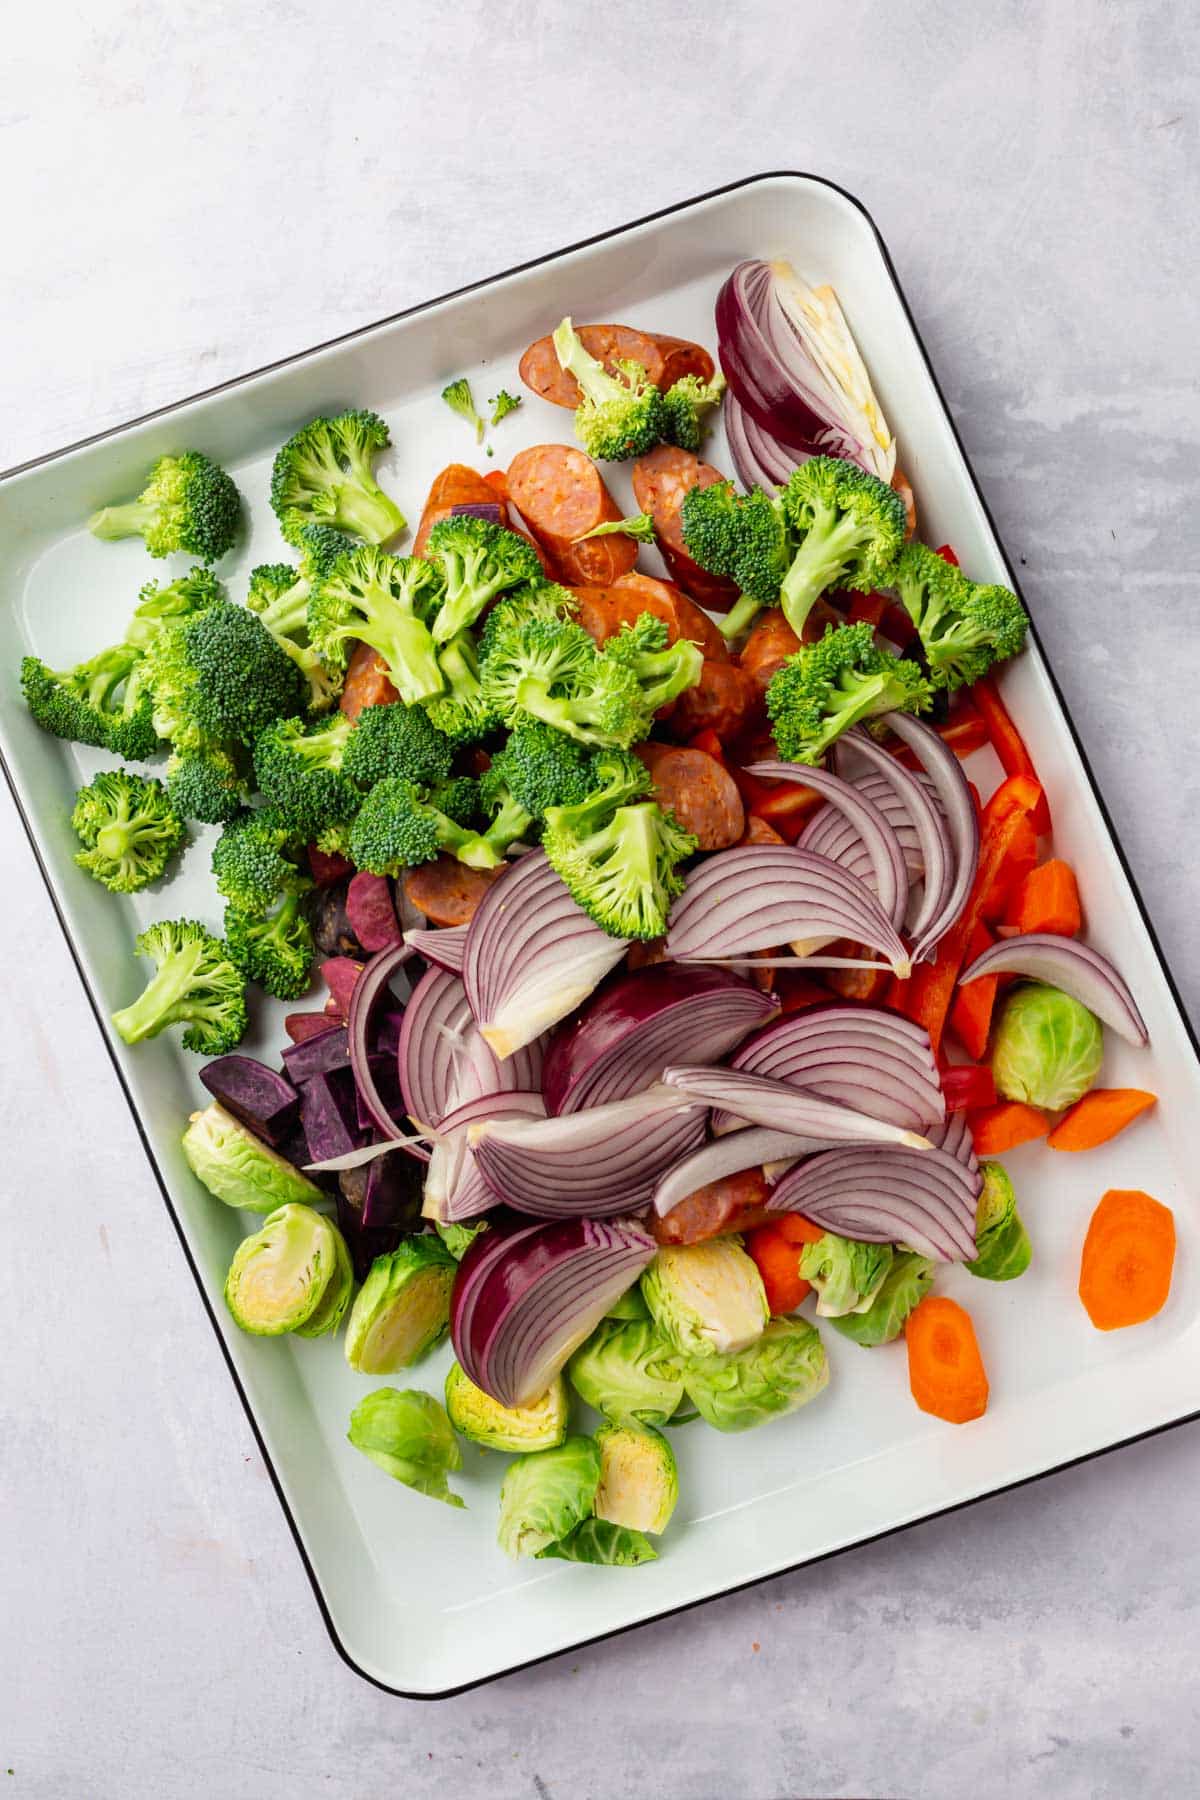 Raw vegetables combined on a sheet pan before baking.